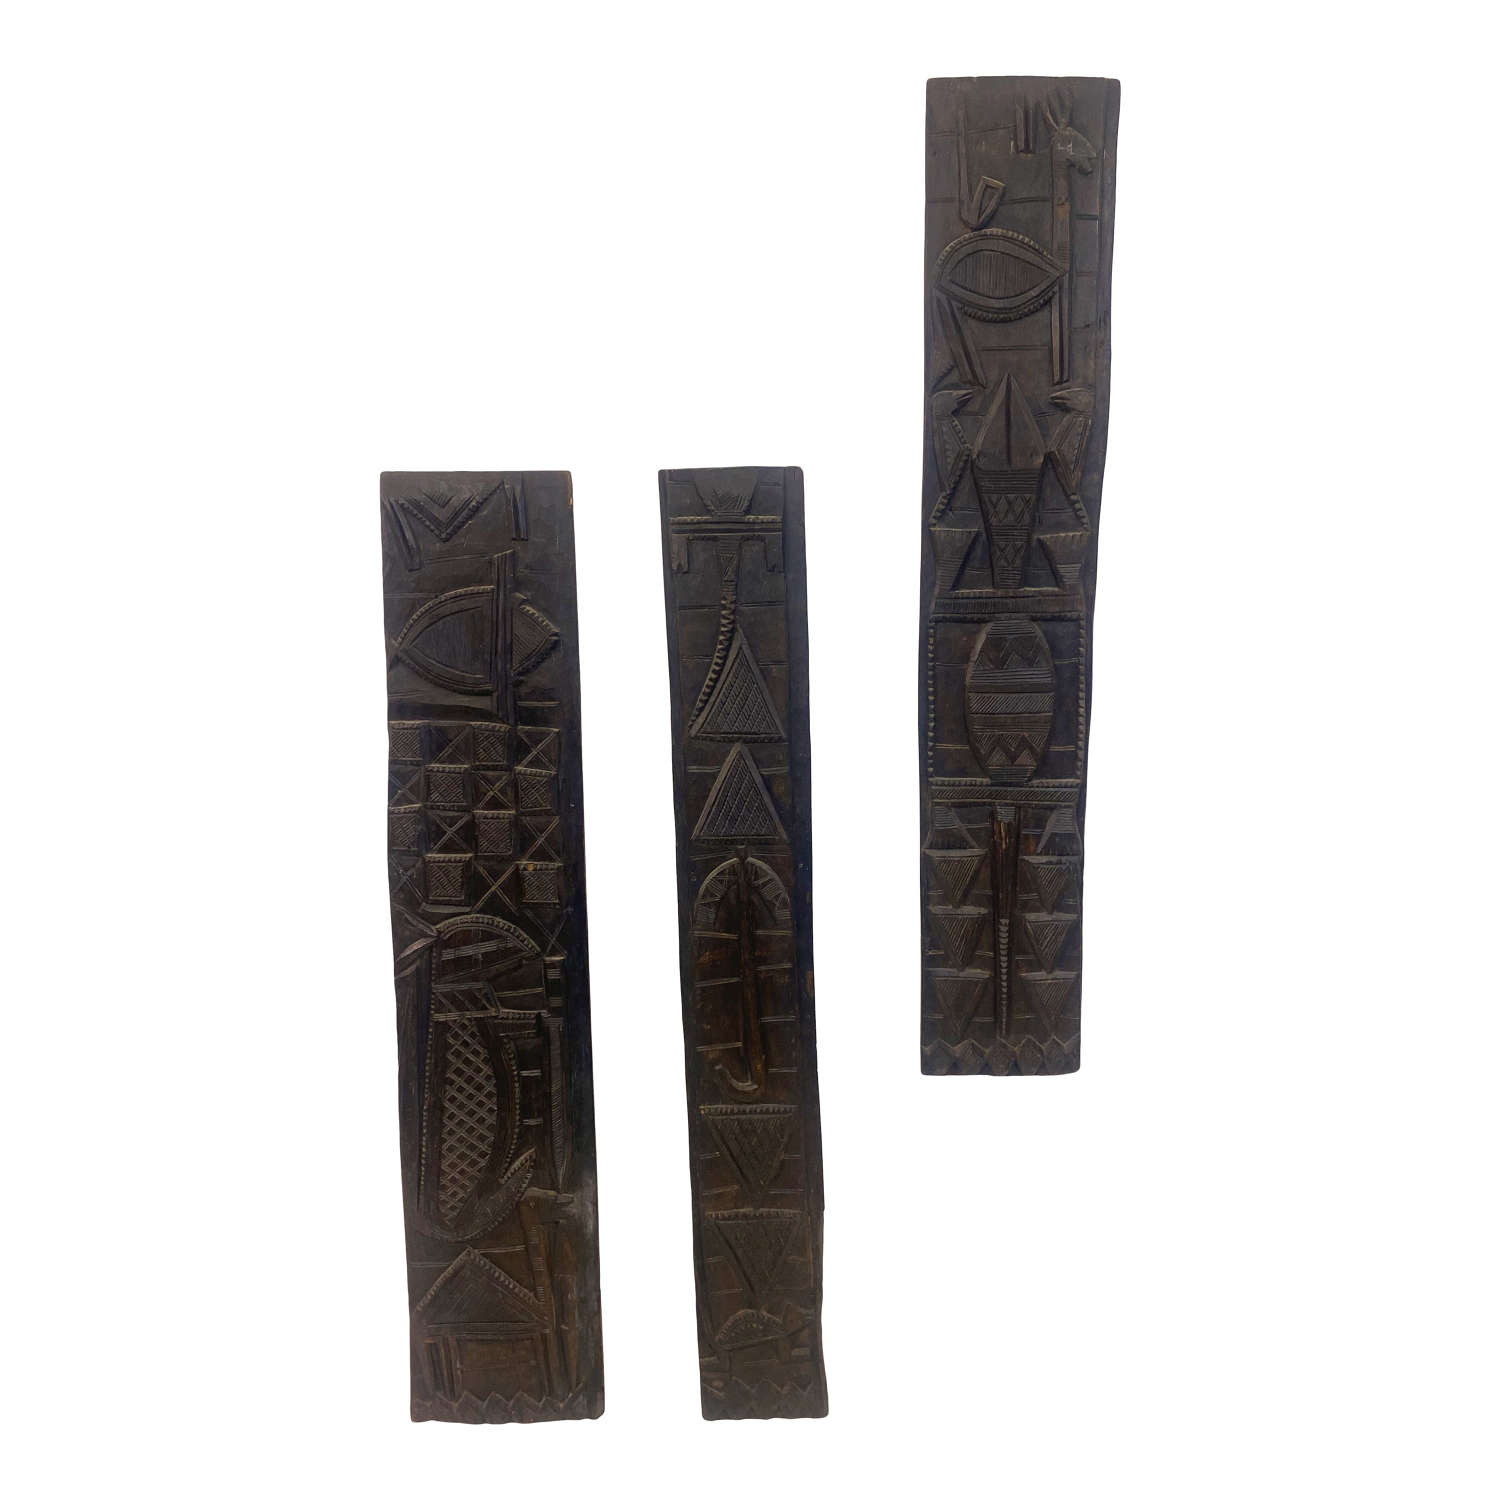 Carved African Wood Door Panel Wall Plaques